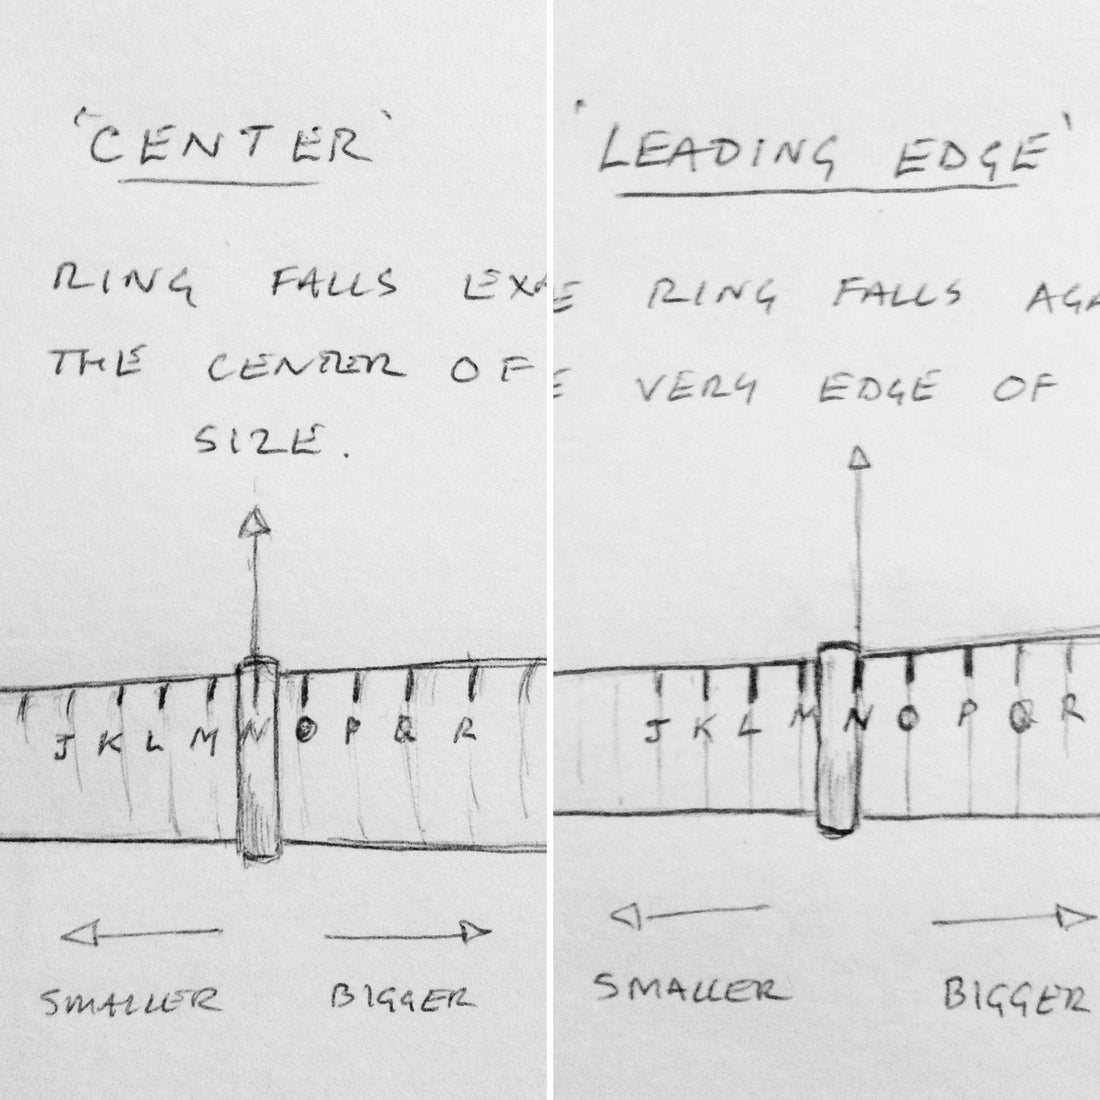 Ring Sizing Explained. What's the difference between 'Leading Edge' and 'Centre'?